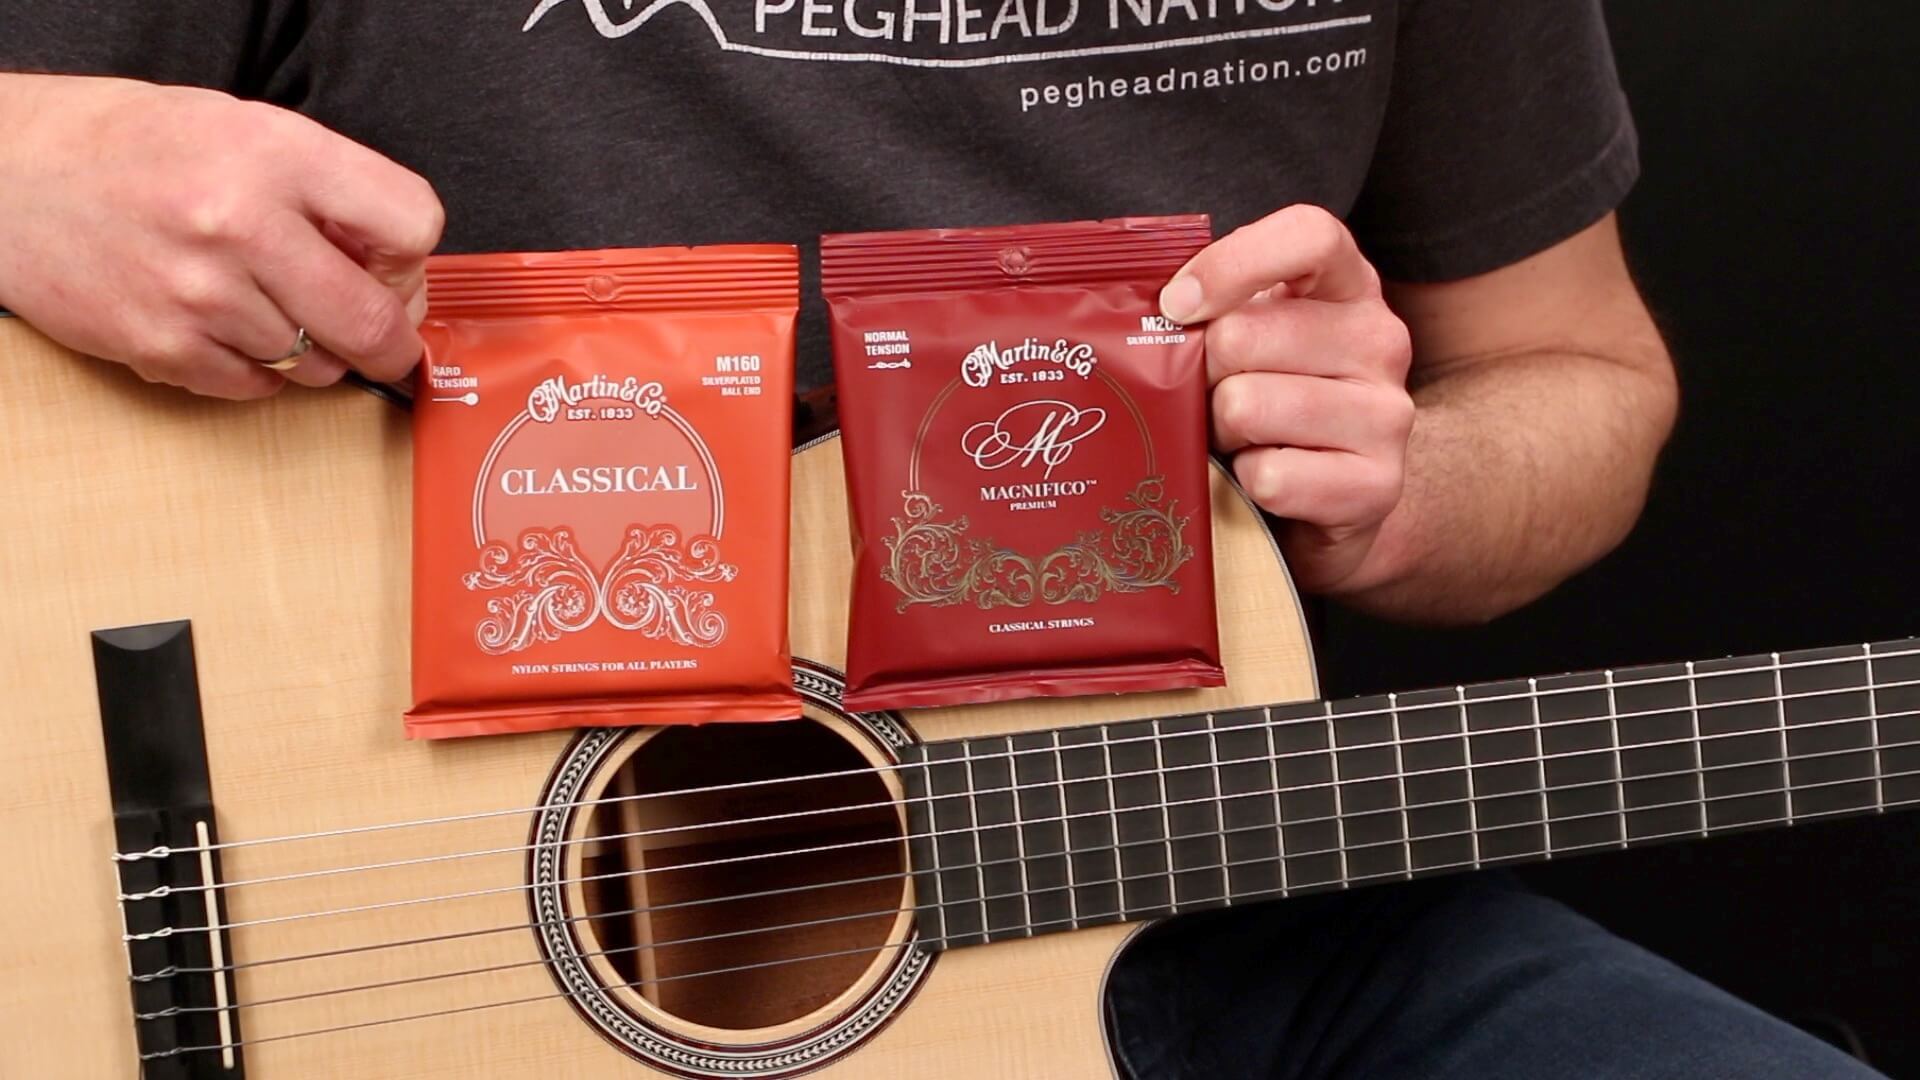 Martin Classical Strings and Nylon Guitar - Peghead Nation